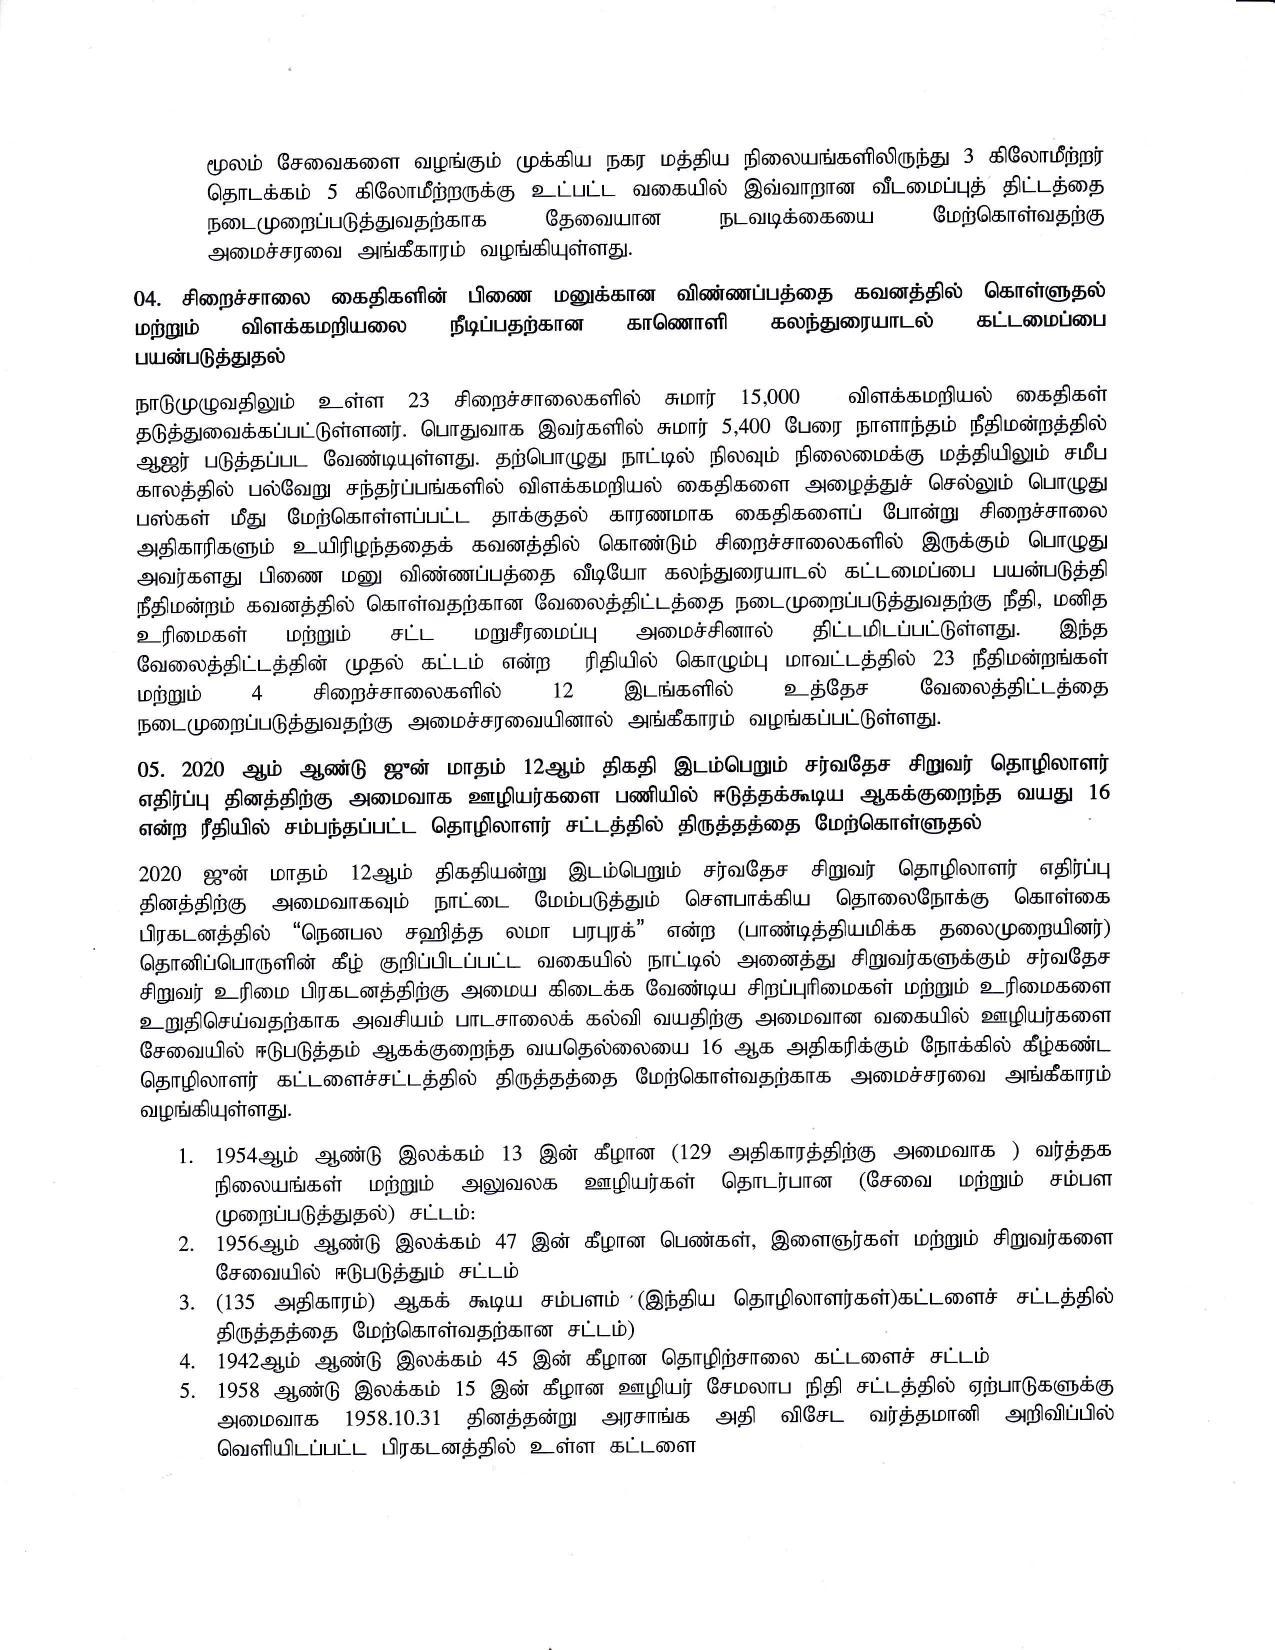 Tamil Cabinet 11.06.20 min page 002